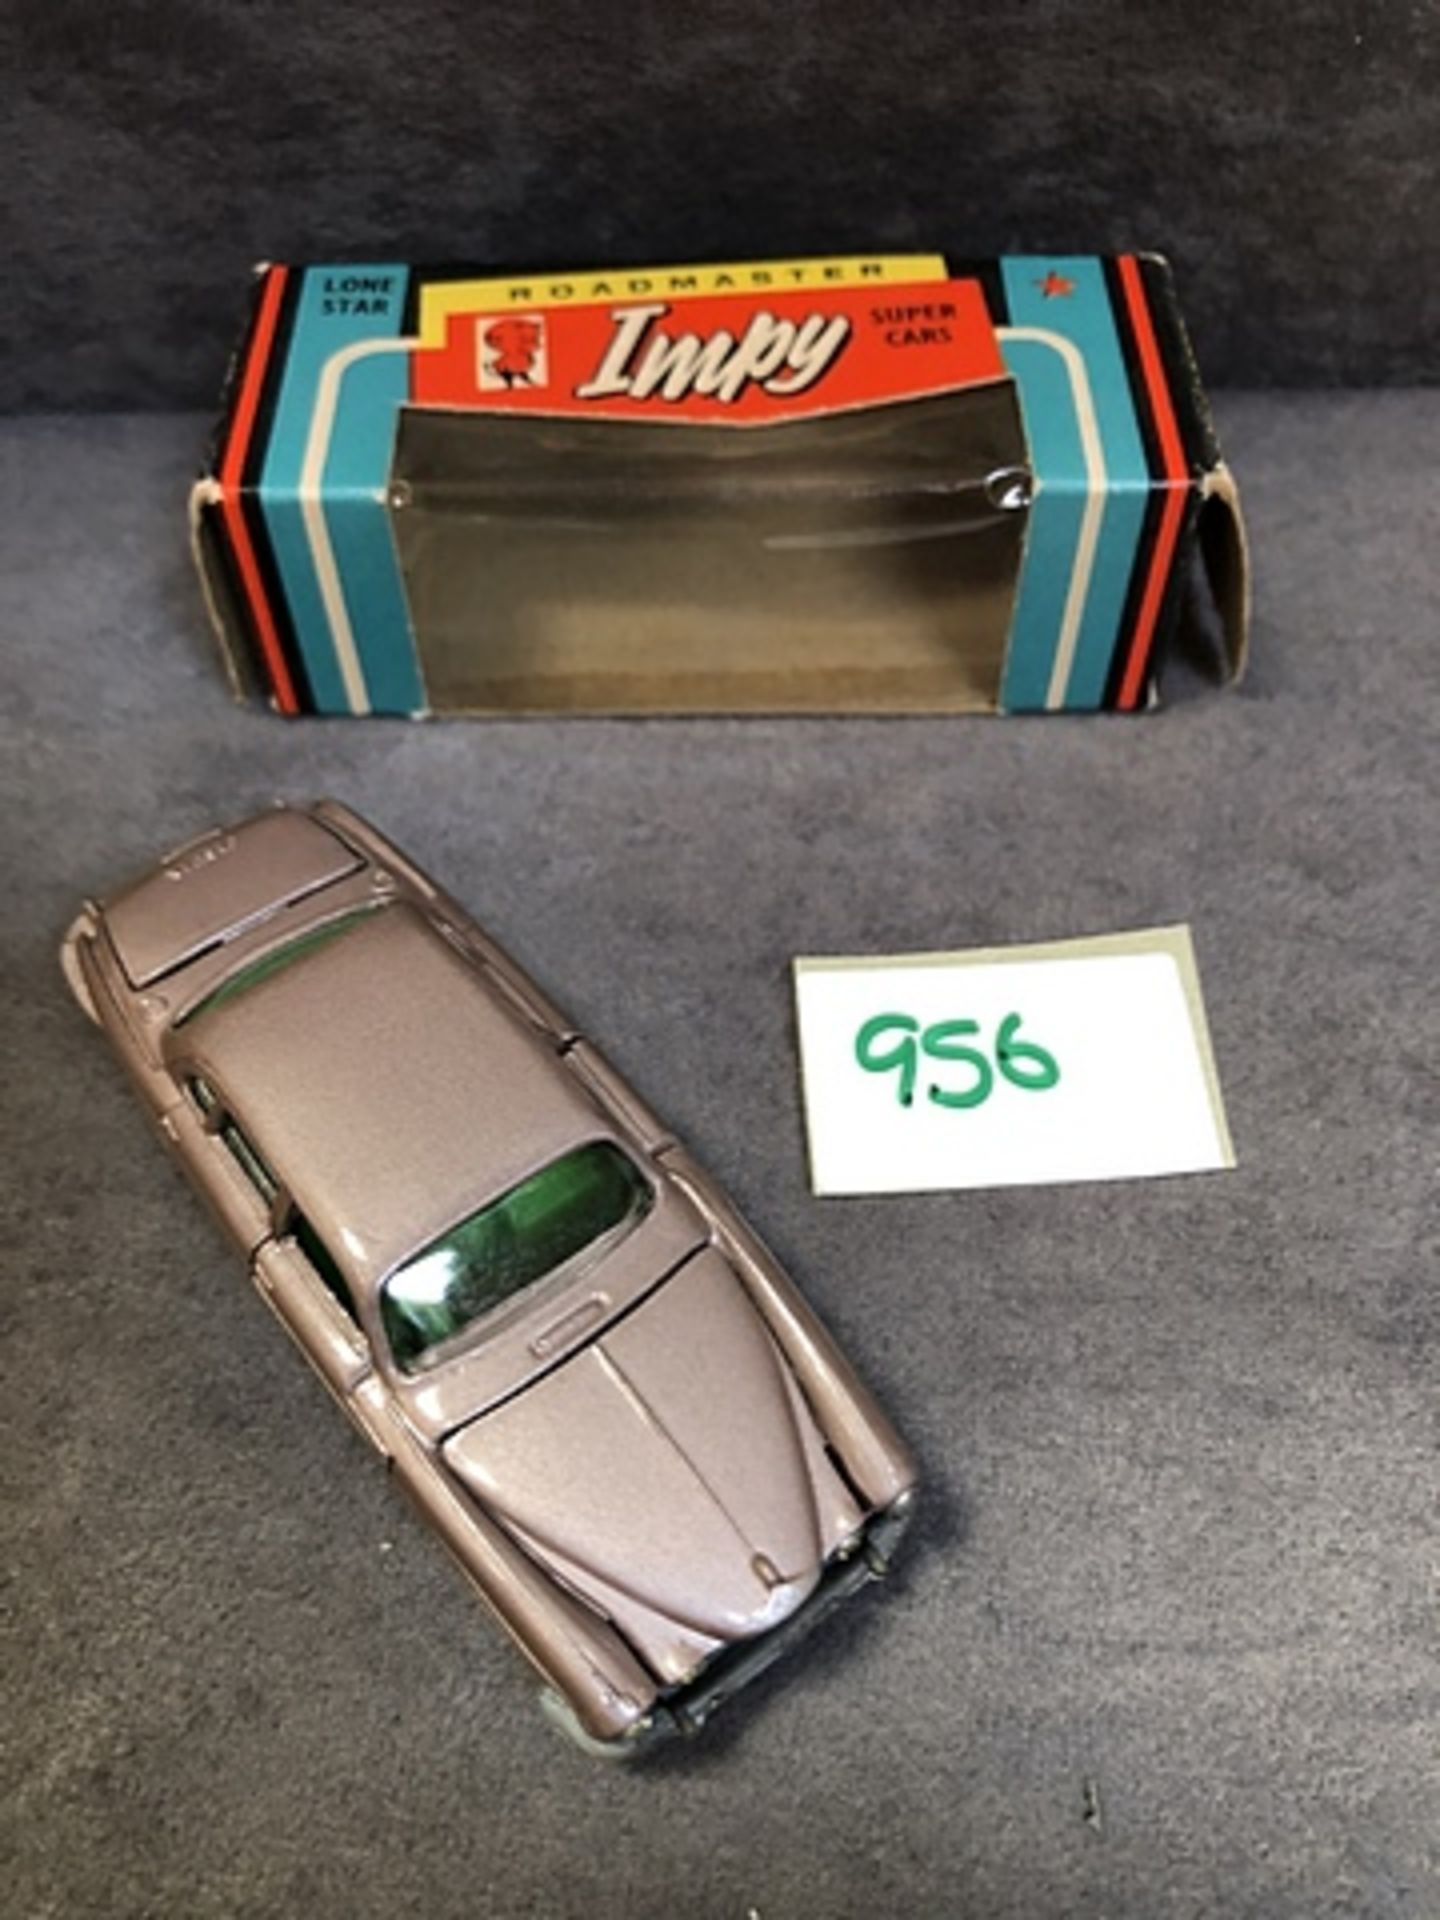 Lone Star Impy Roadstar #10 Jaguar Mk X In Brown With Green Interior Complete With Box (Damaged - Image 2 of 2